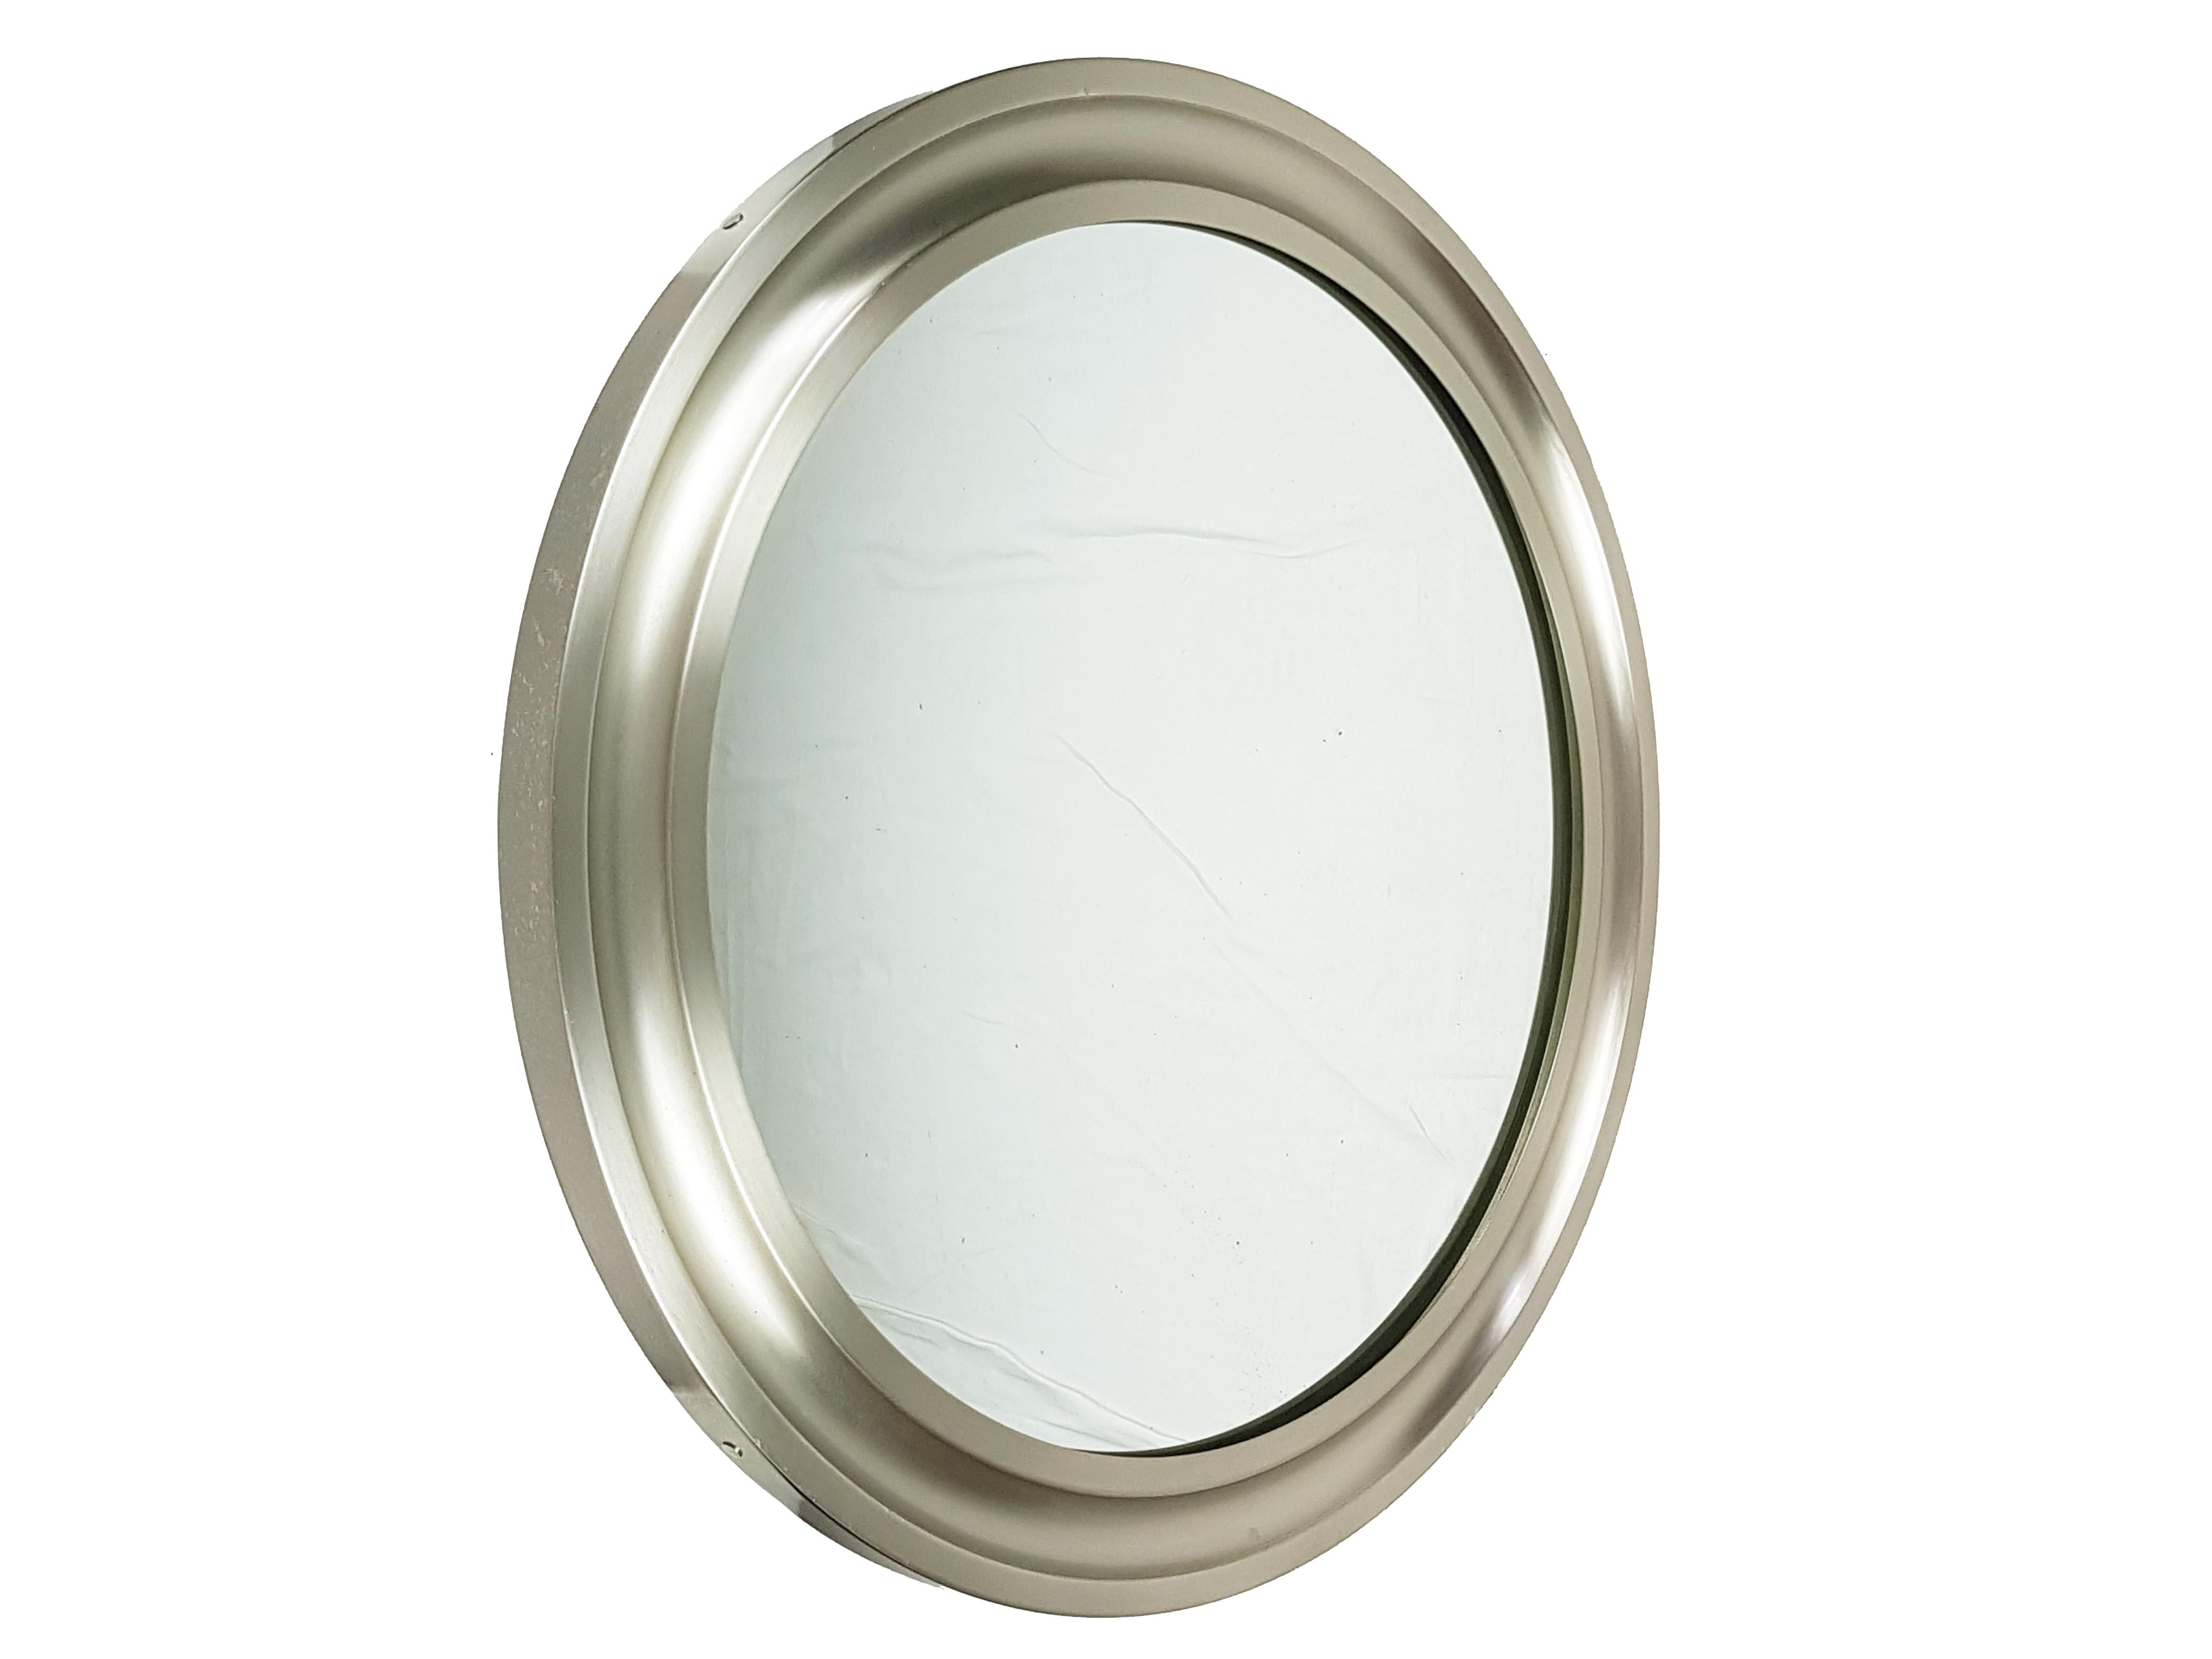 This wall mirrors are made from a nickel-plated brass circular frame with brushed finishing and a black metal back. thery remain in very good condition.